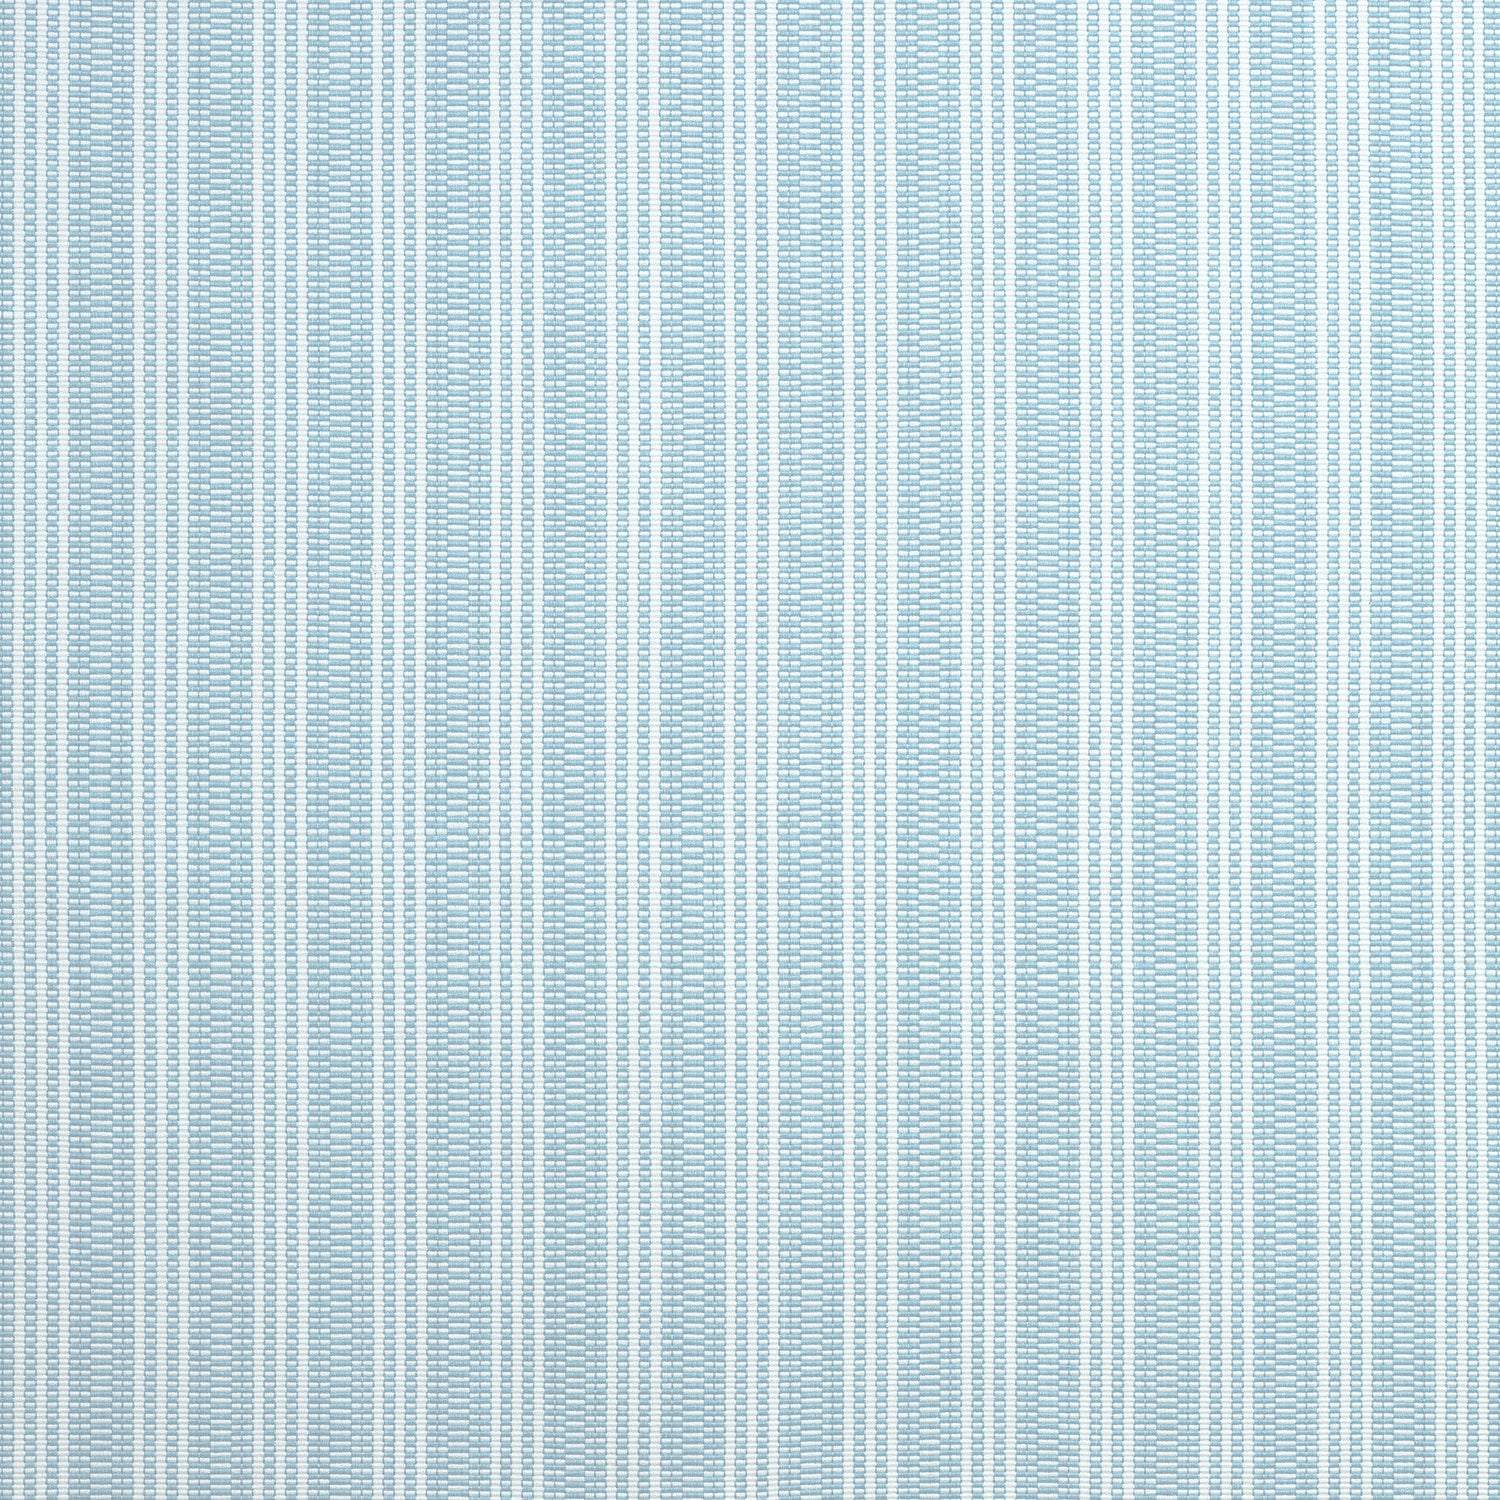 Reed Stripe fabric in spa blue color - pattern number AW9850 - by Anna French in the Nara collection